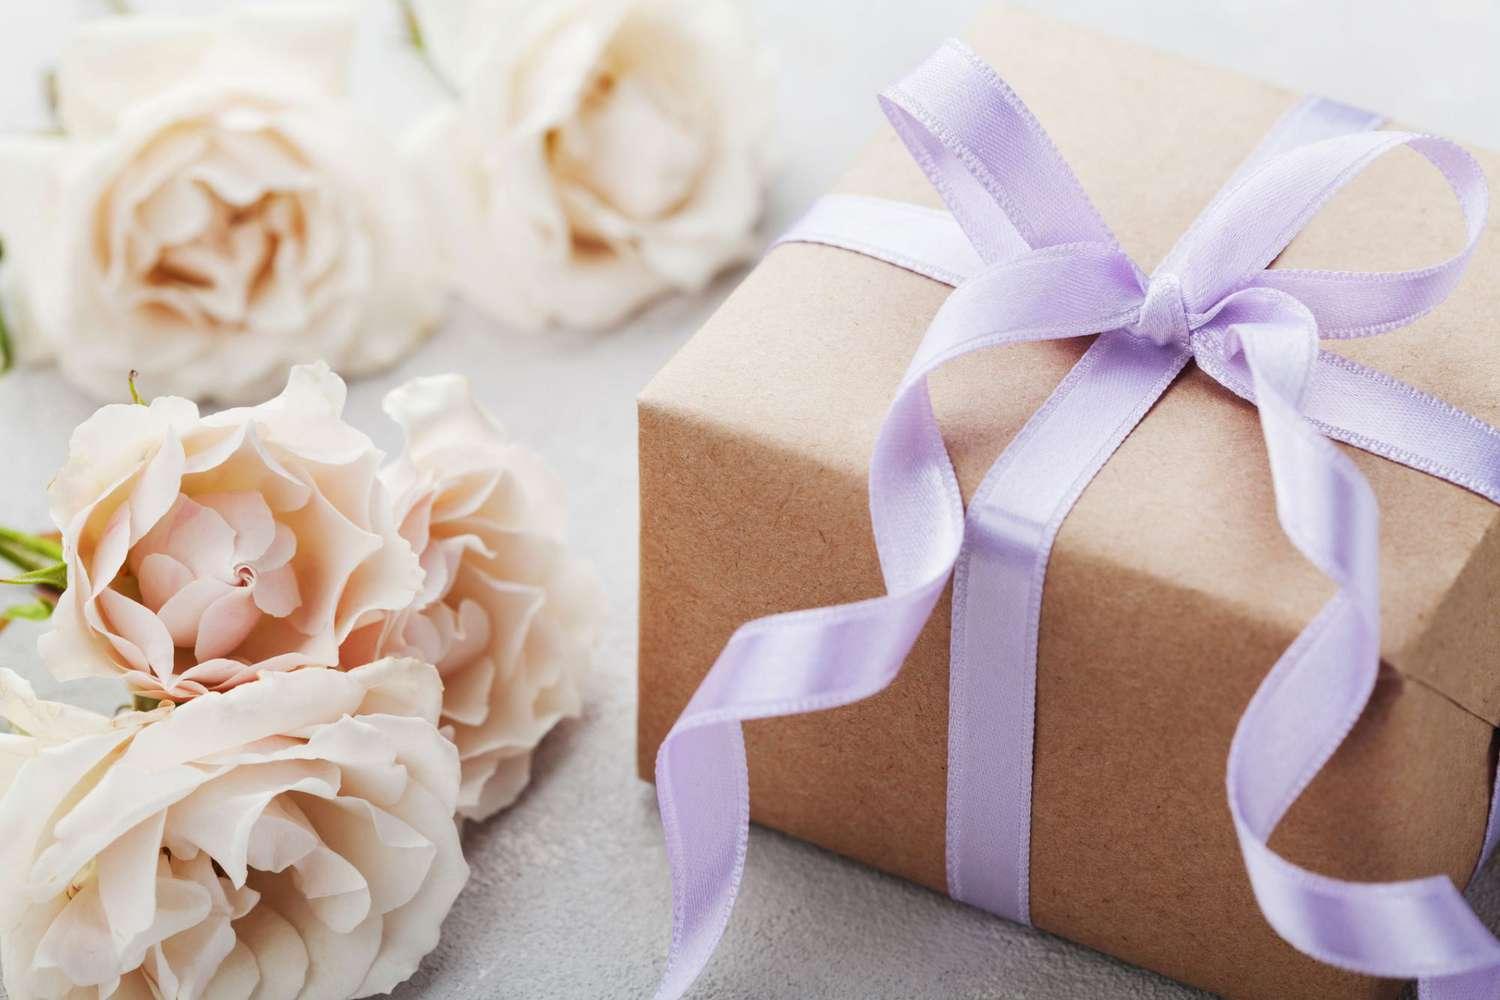 Wedding Gifts For Her - Luxurious Weddings